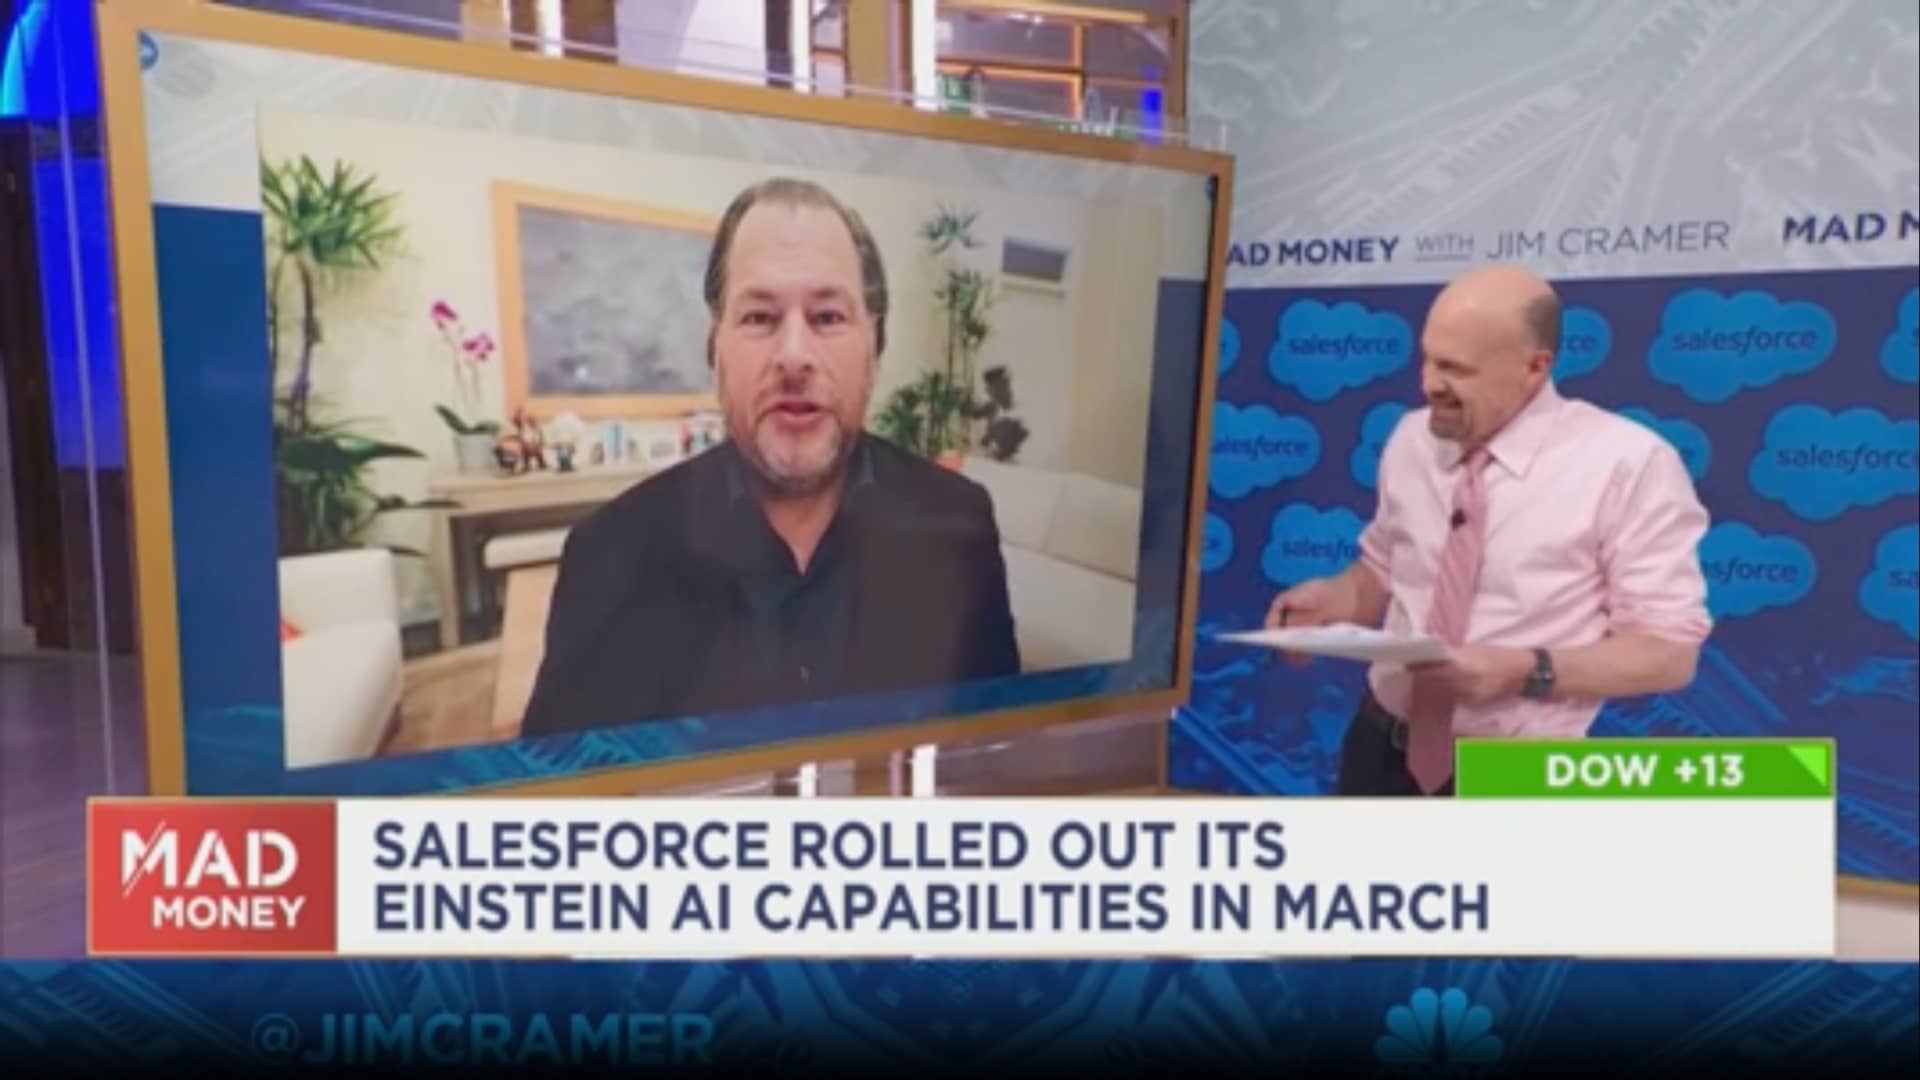 Our data cloud is an 'incredible new product', says Salesforce CEO Marc Benioff